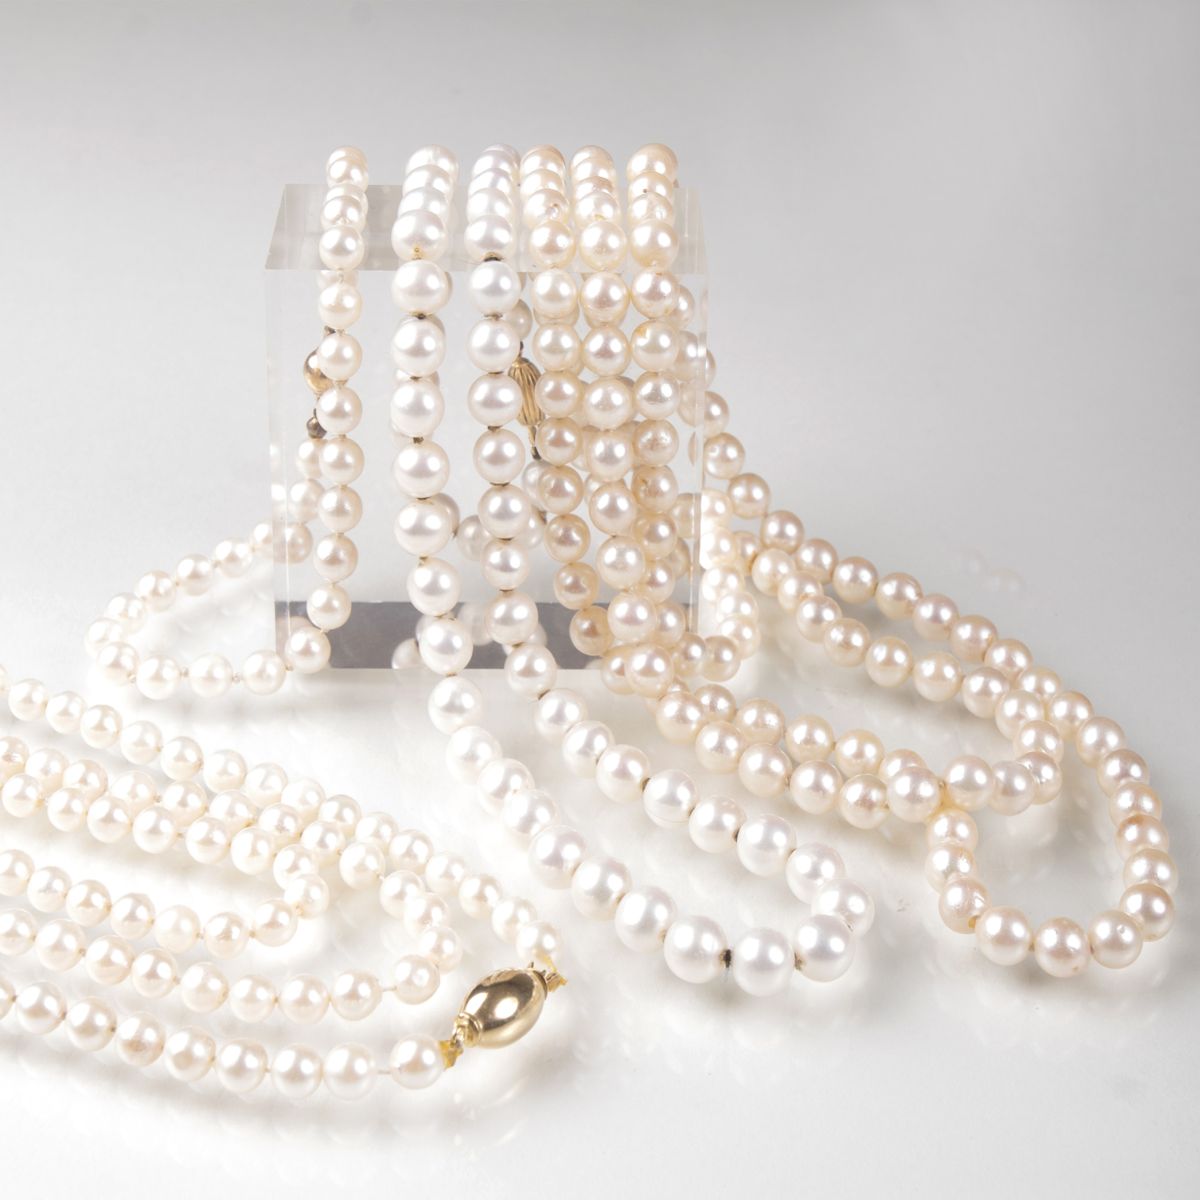 Three pearl necklaces and one pearl bracelet